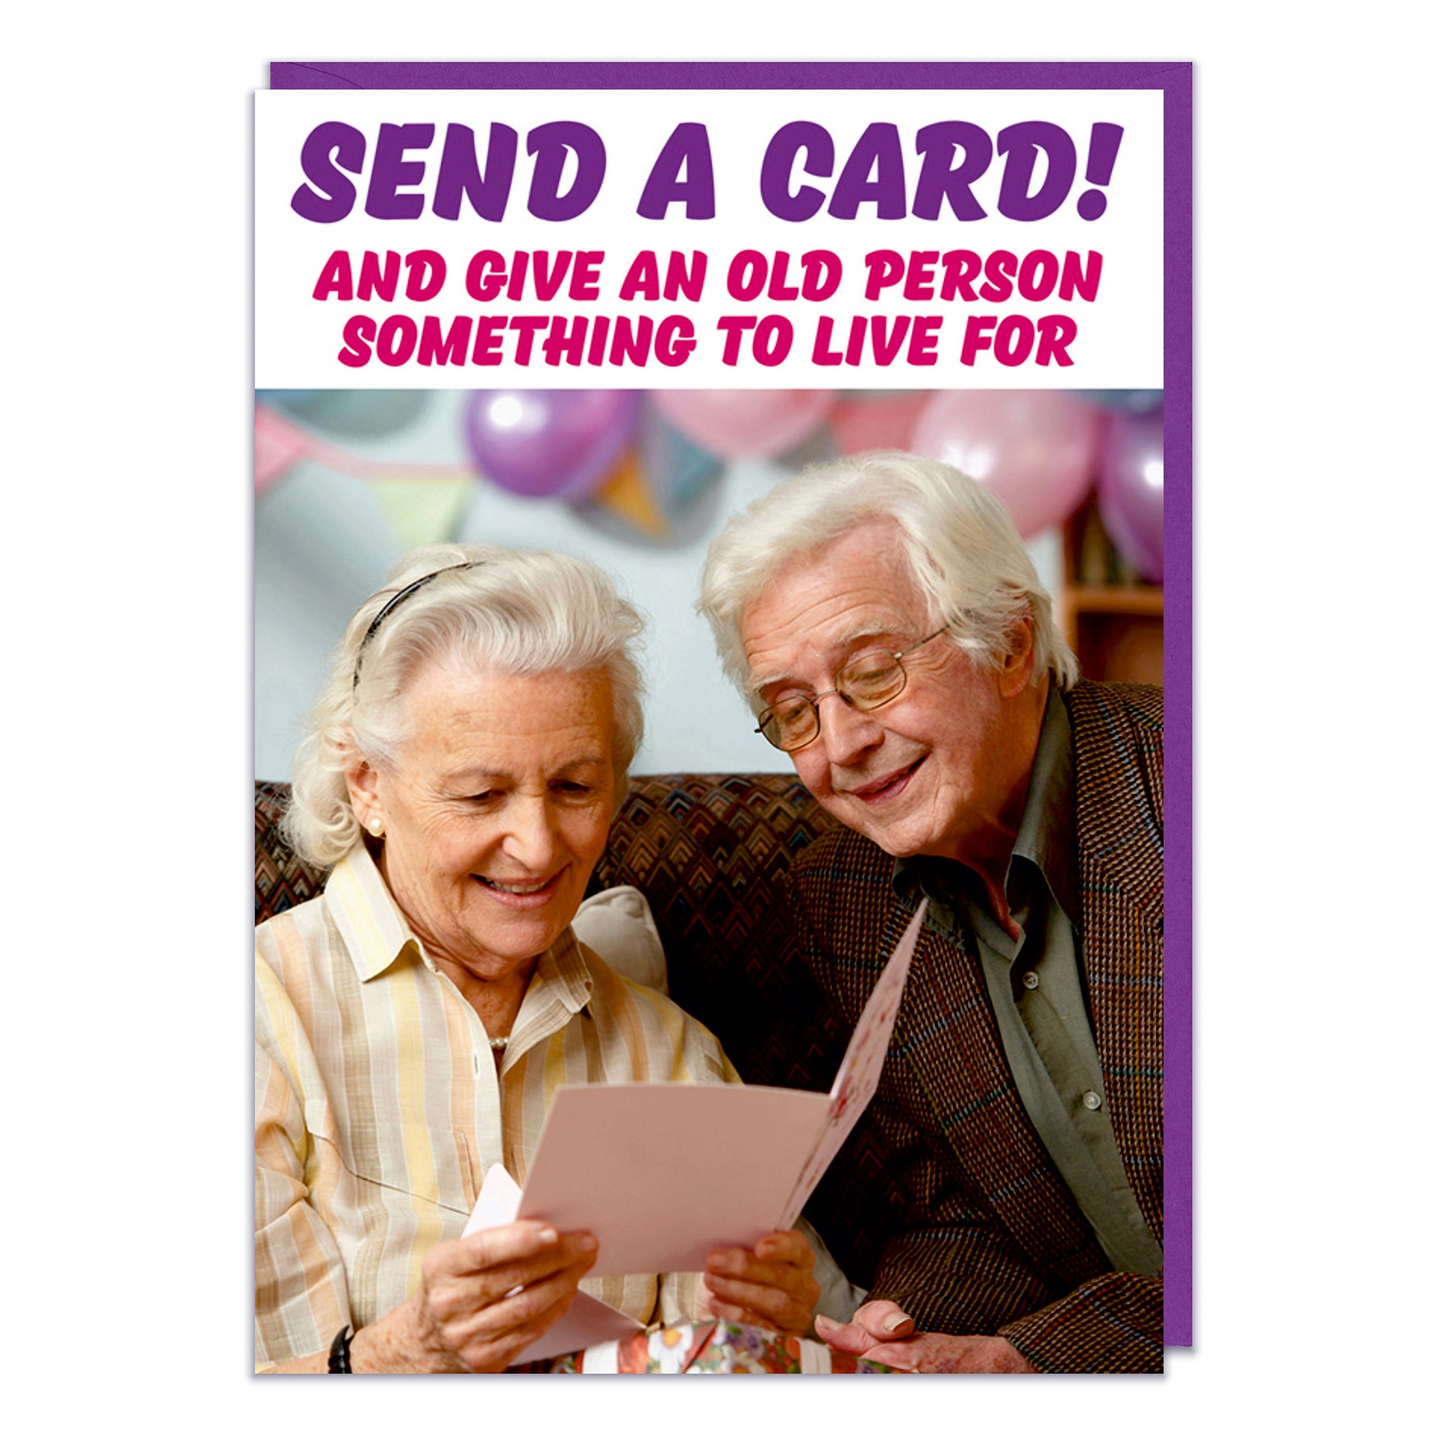 Send A Card! And Give An Old Person Something To Live For - Greeting Card - Mellow Monkey